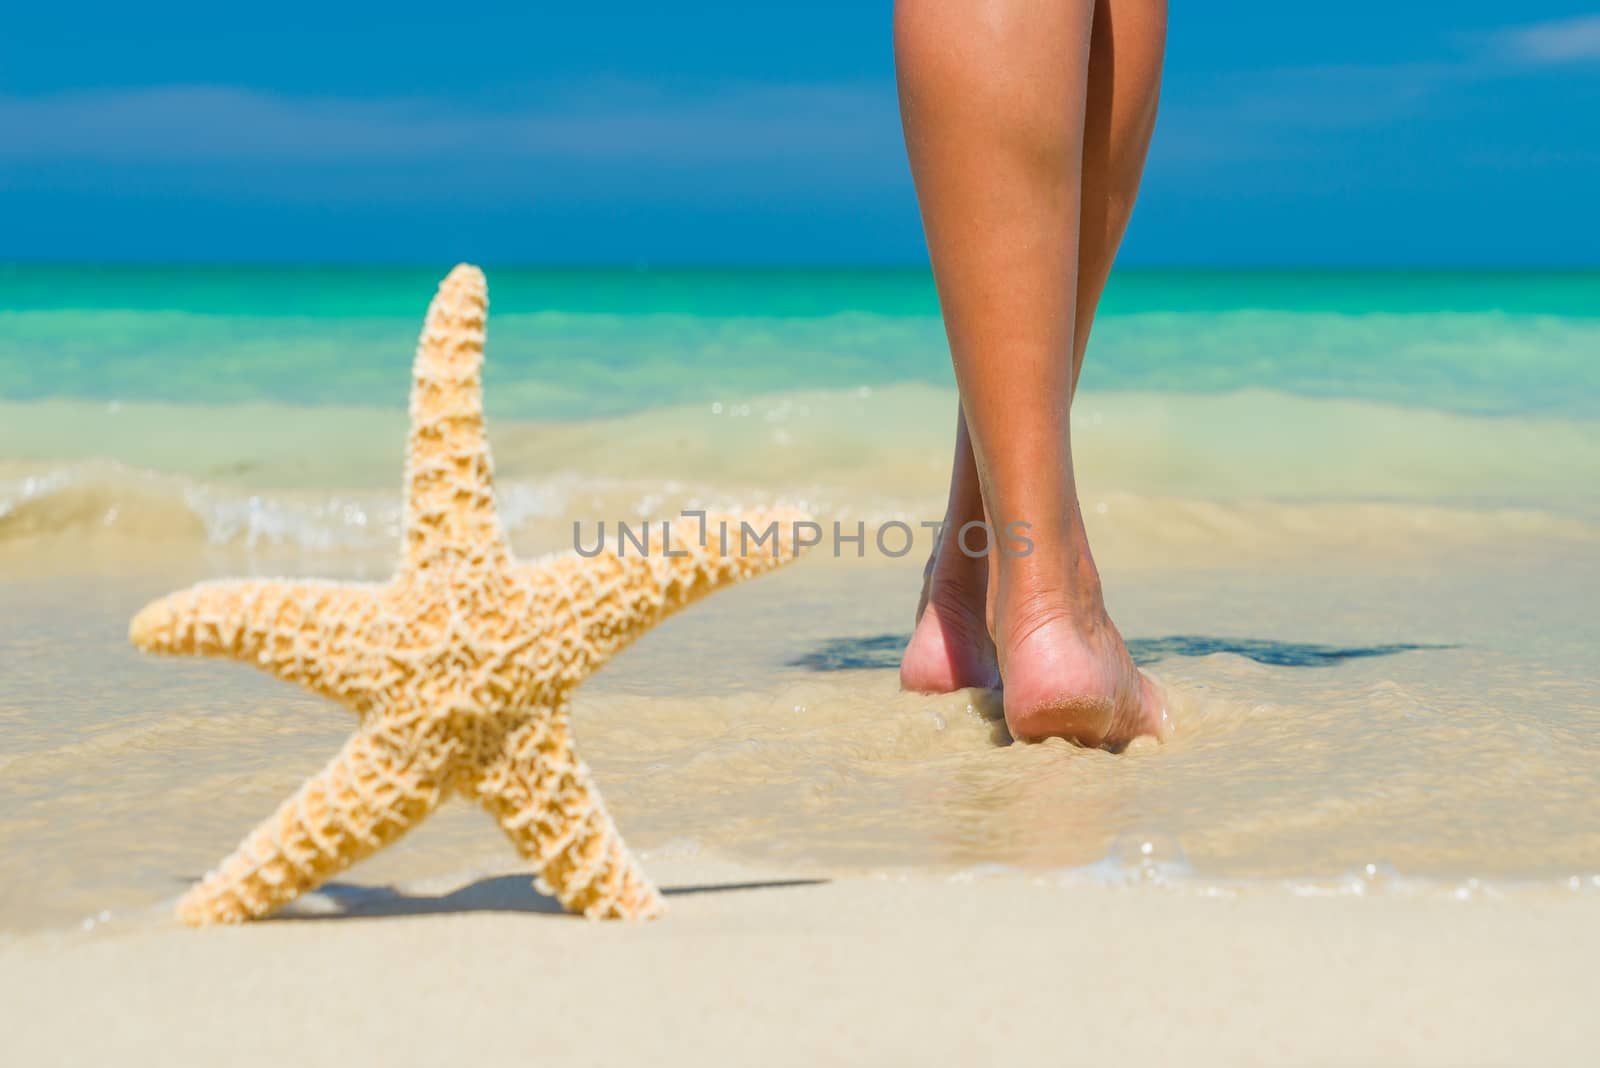 Human feet on the wet sand with a starfish.